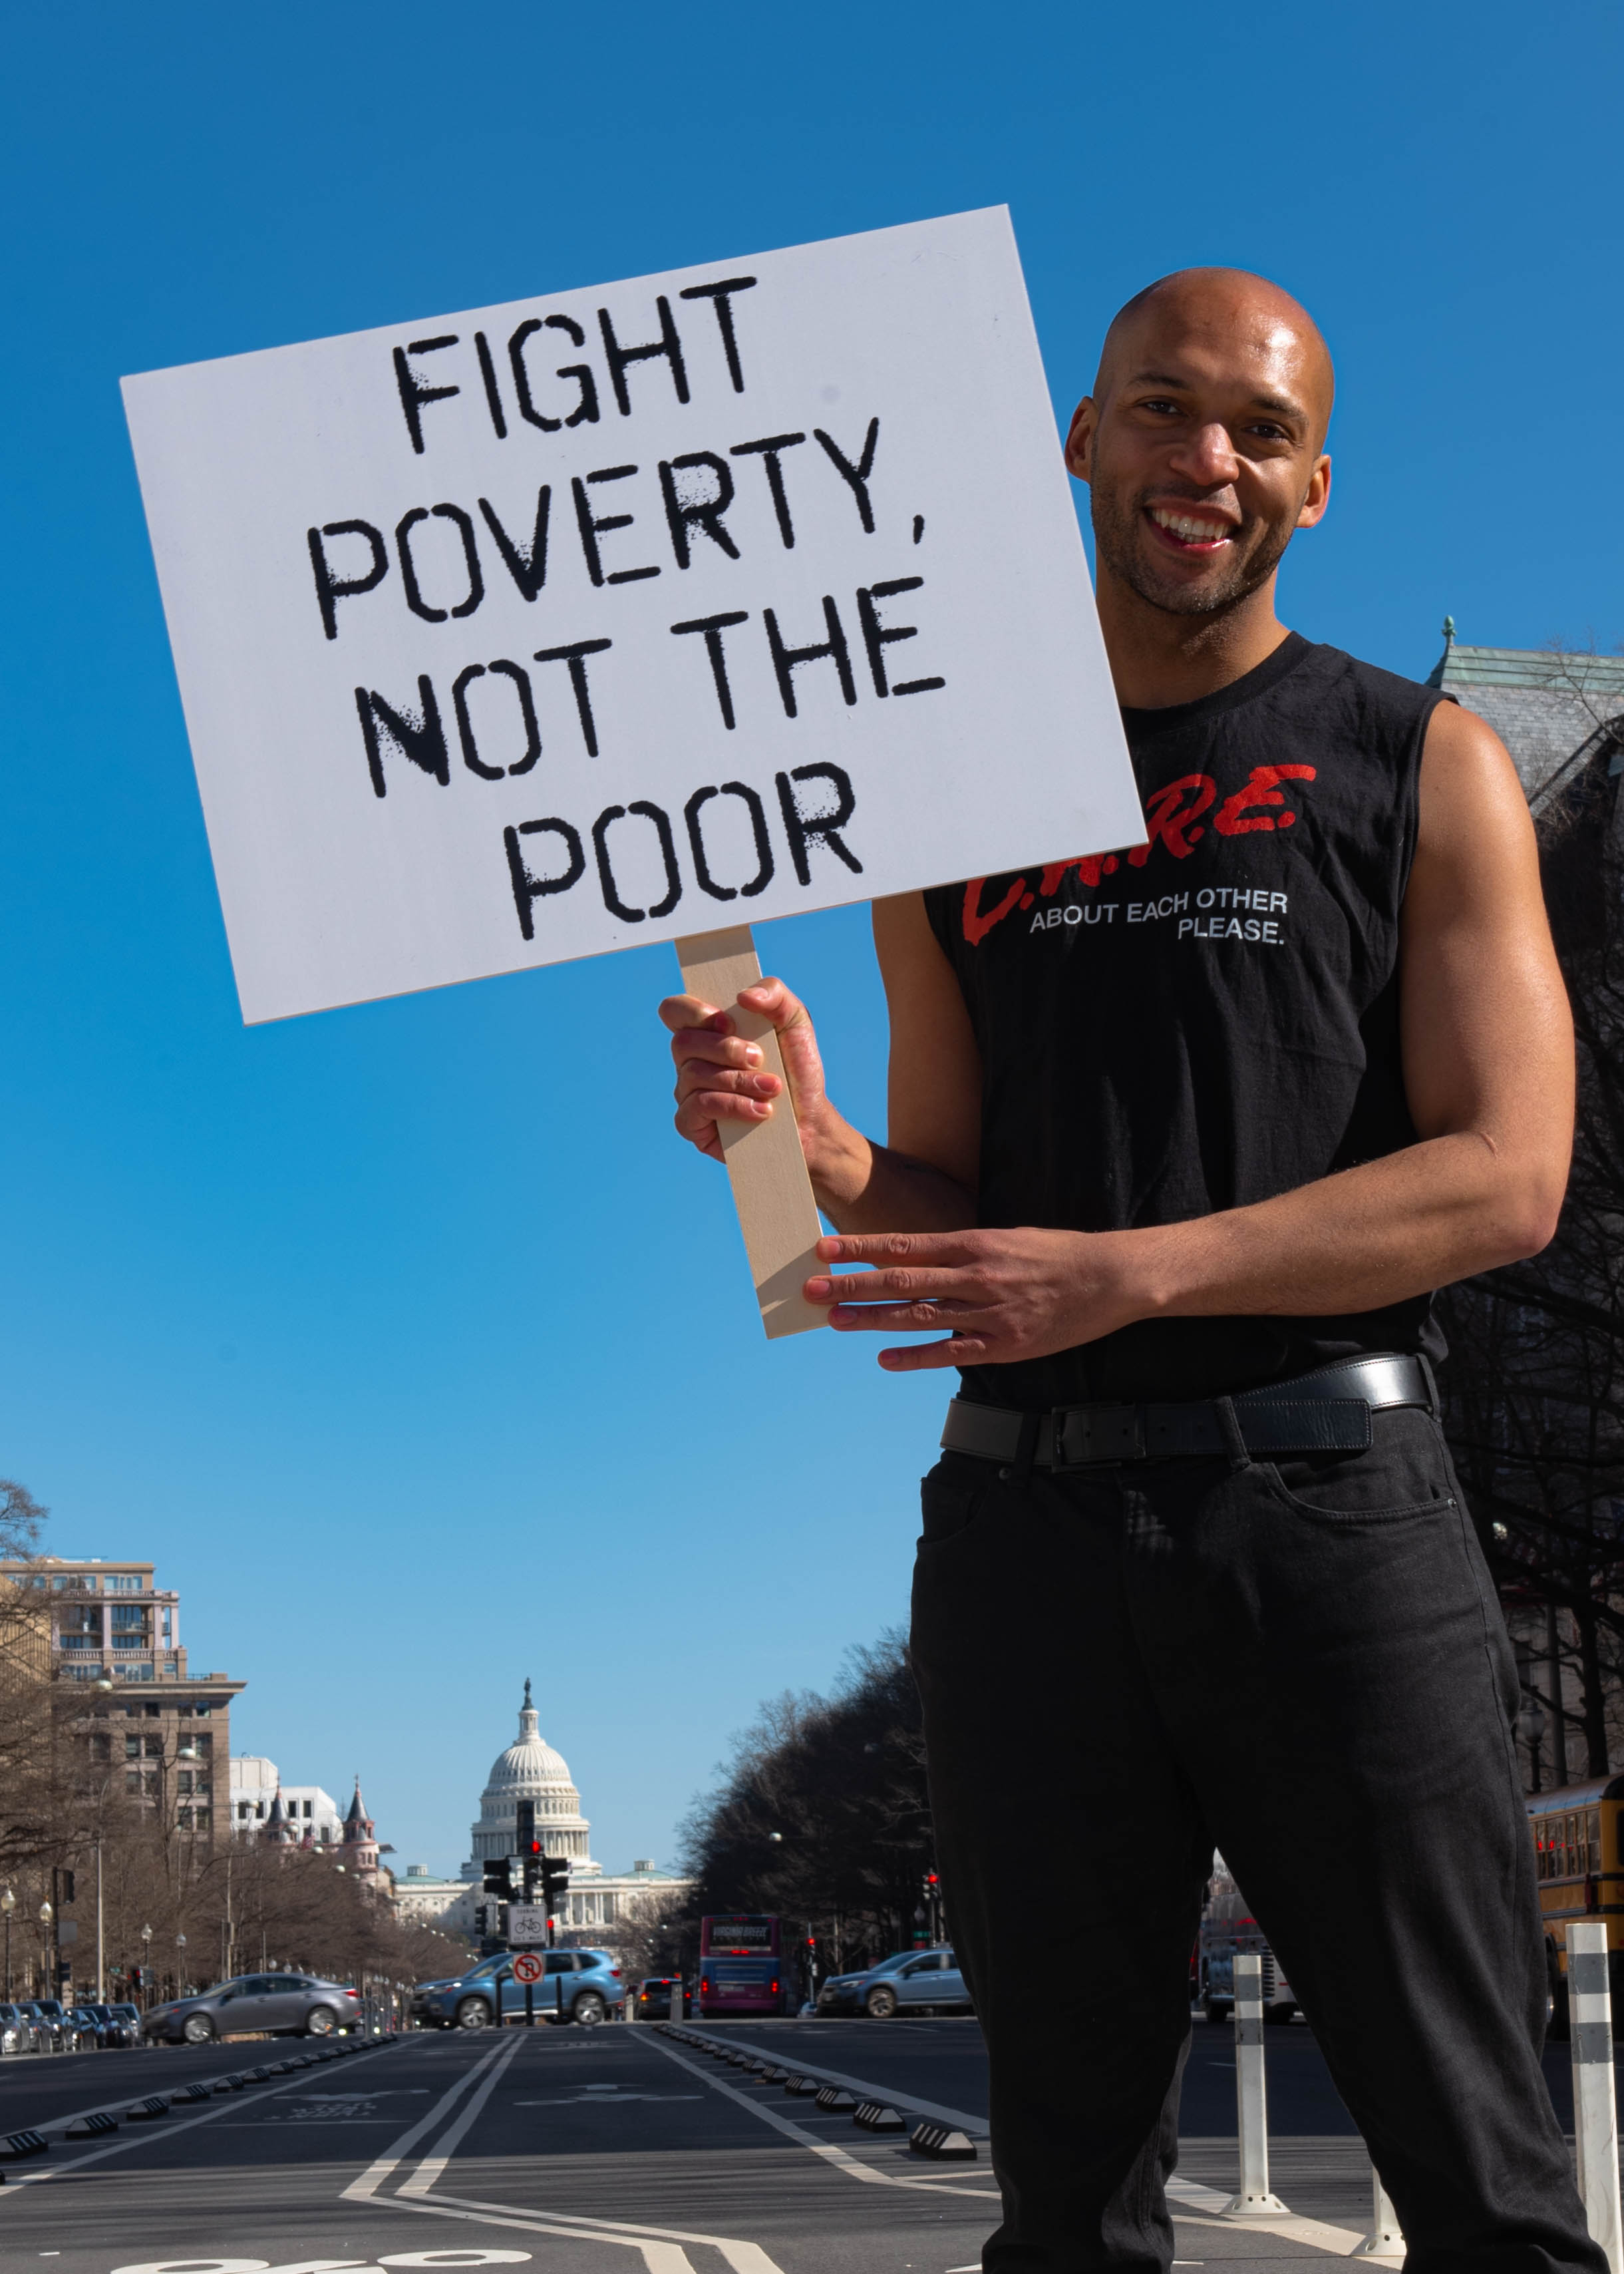 Tyrone with a sign saying “Fight poverty, not the poor."